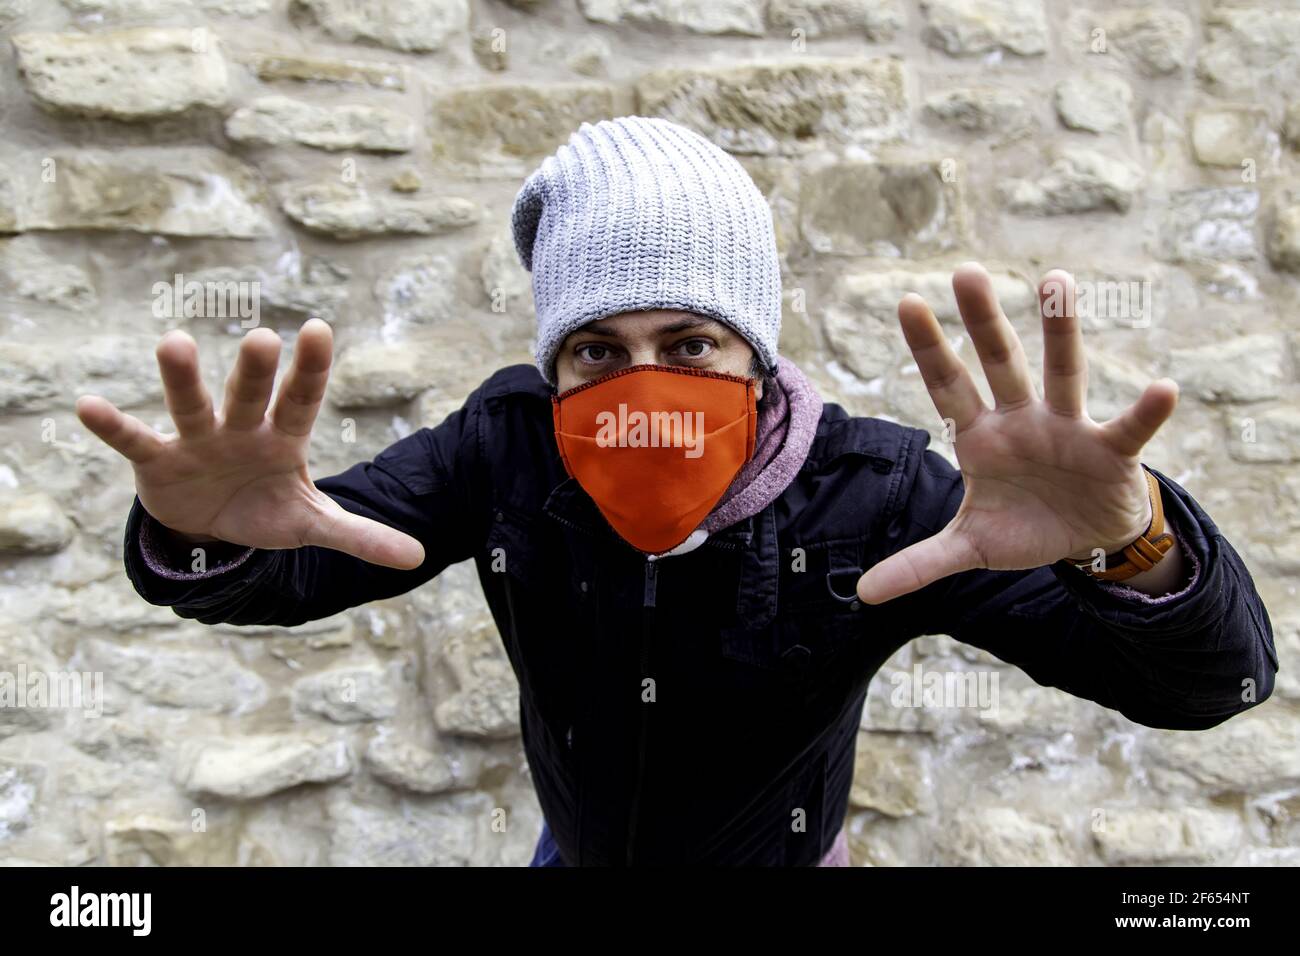 Young street gang with mask in park, social problem Stock Photo